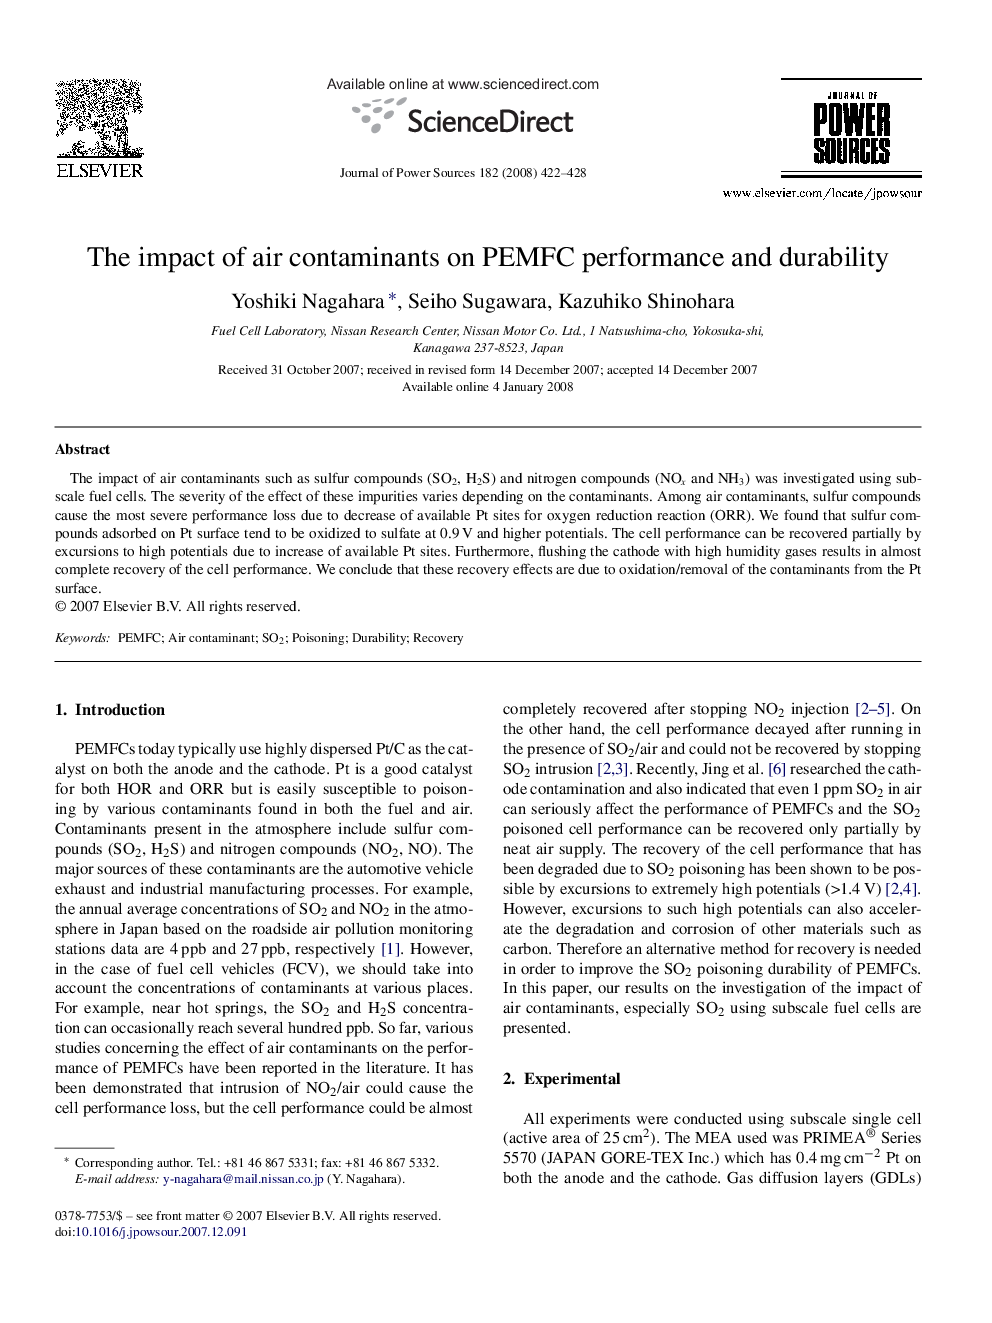 The impact of air contaminants on PEMFC performance and durability